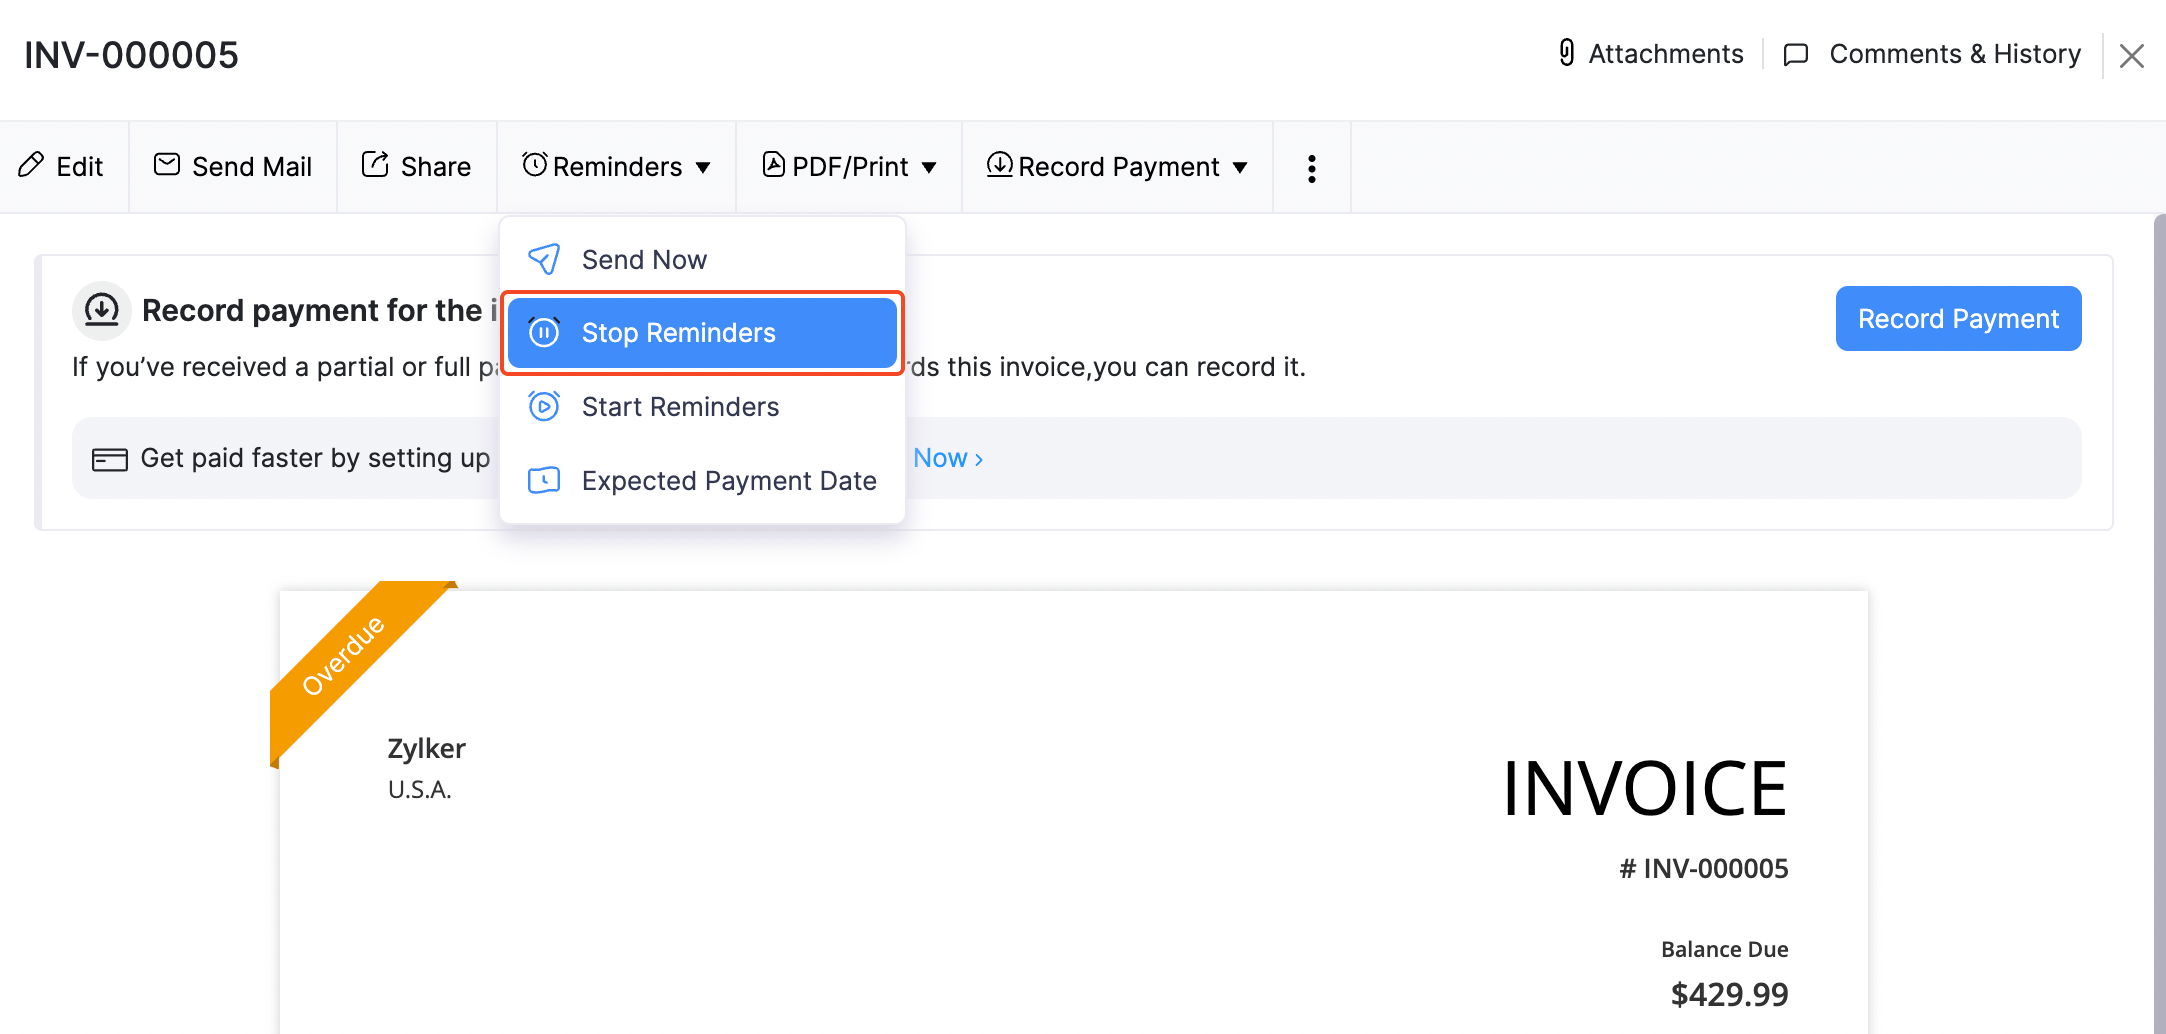 Invoices - Stop Reminders